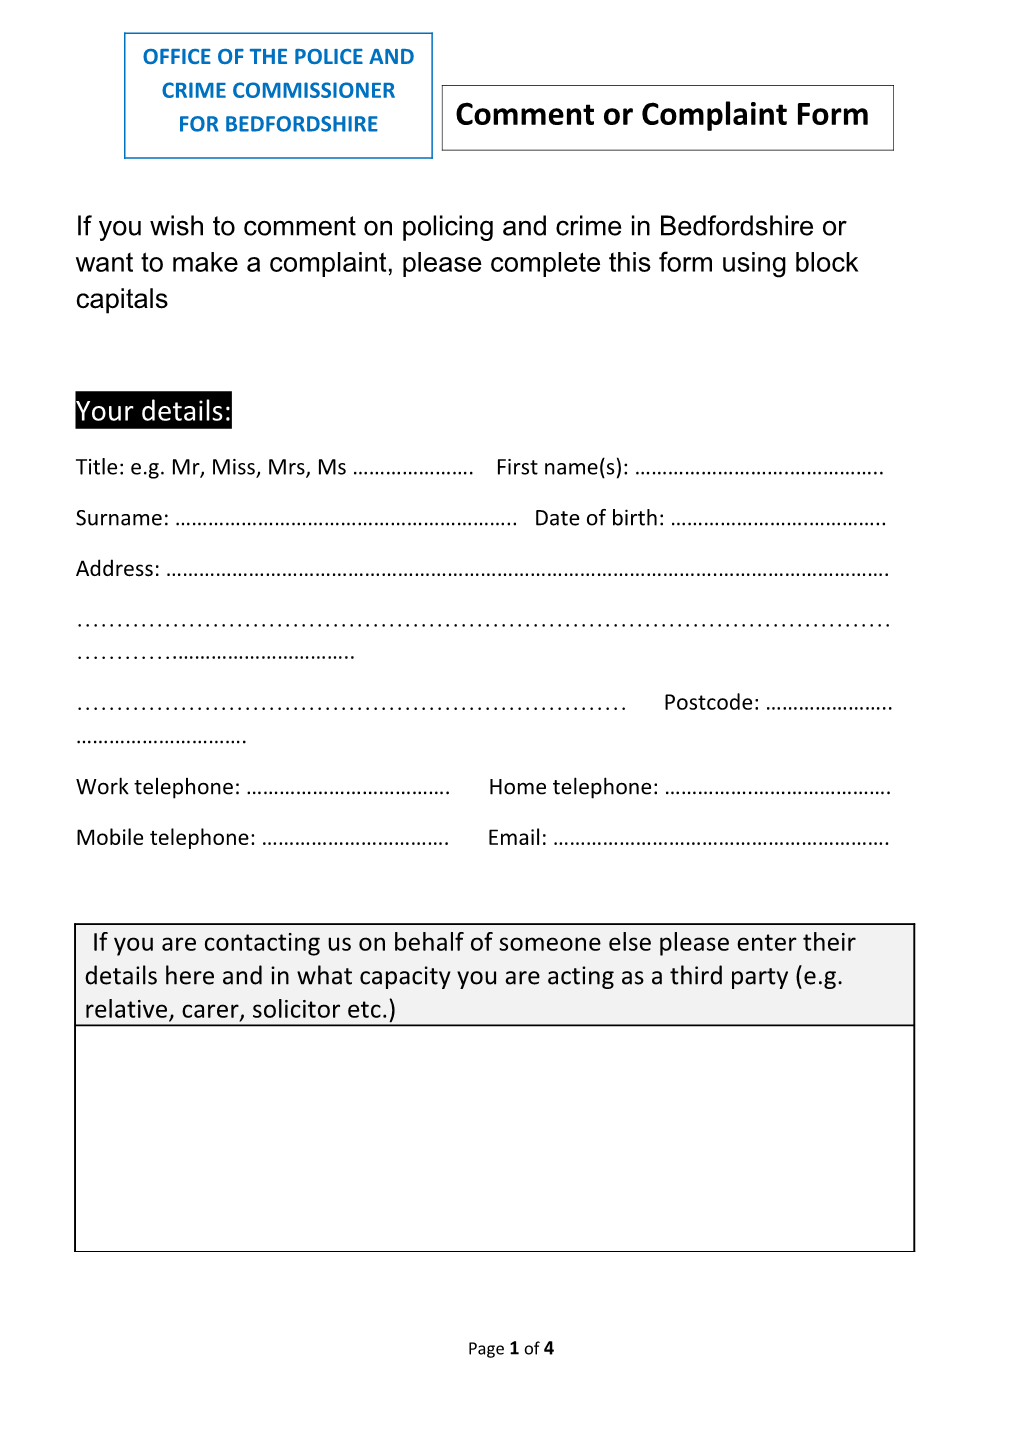 Contact-The-Commissioner-Complaint-Form-Bedfordshire